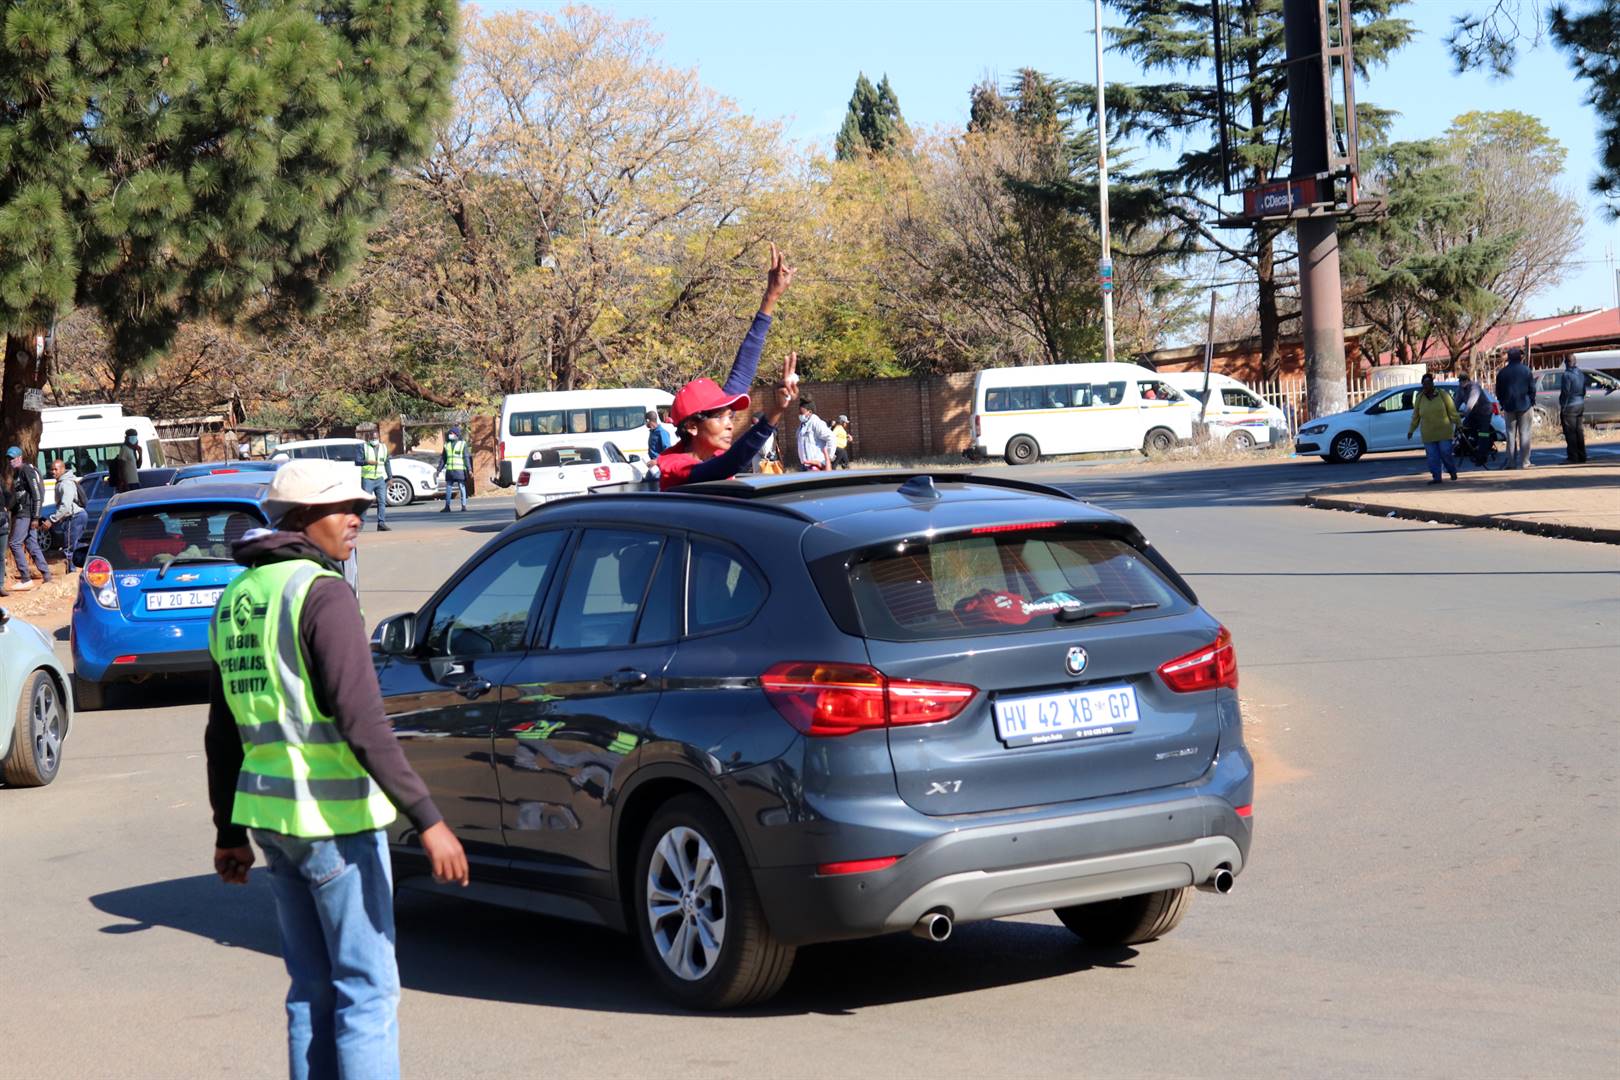 A member of Zondo’s church appears on the sunroof of a moving vehicle with hooting sprung as they celebrate the move of his case to Pretoria High Court. Photo by Sifiso Jimta